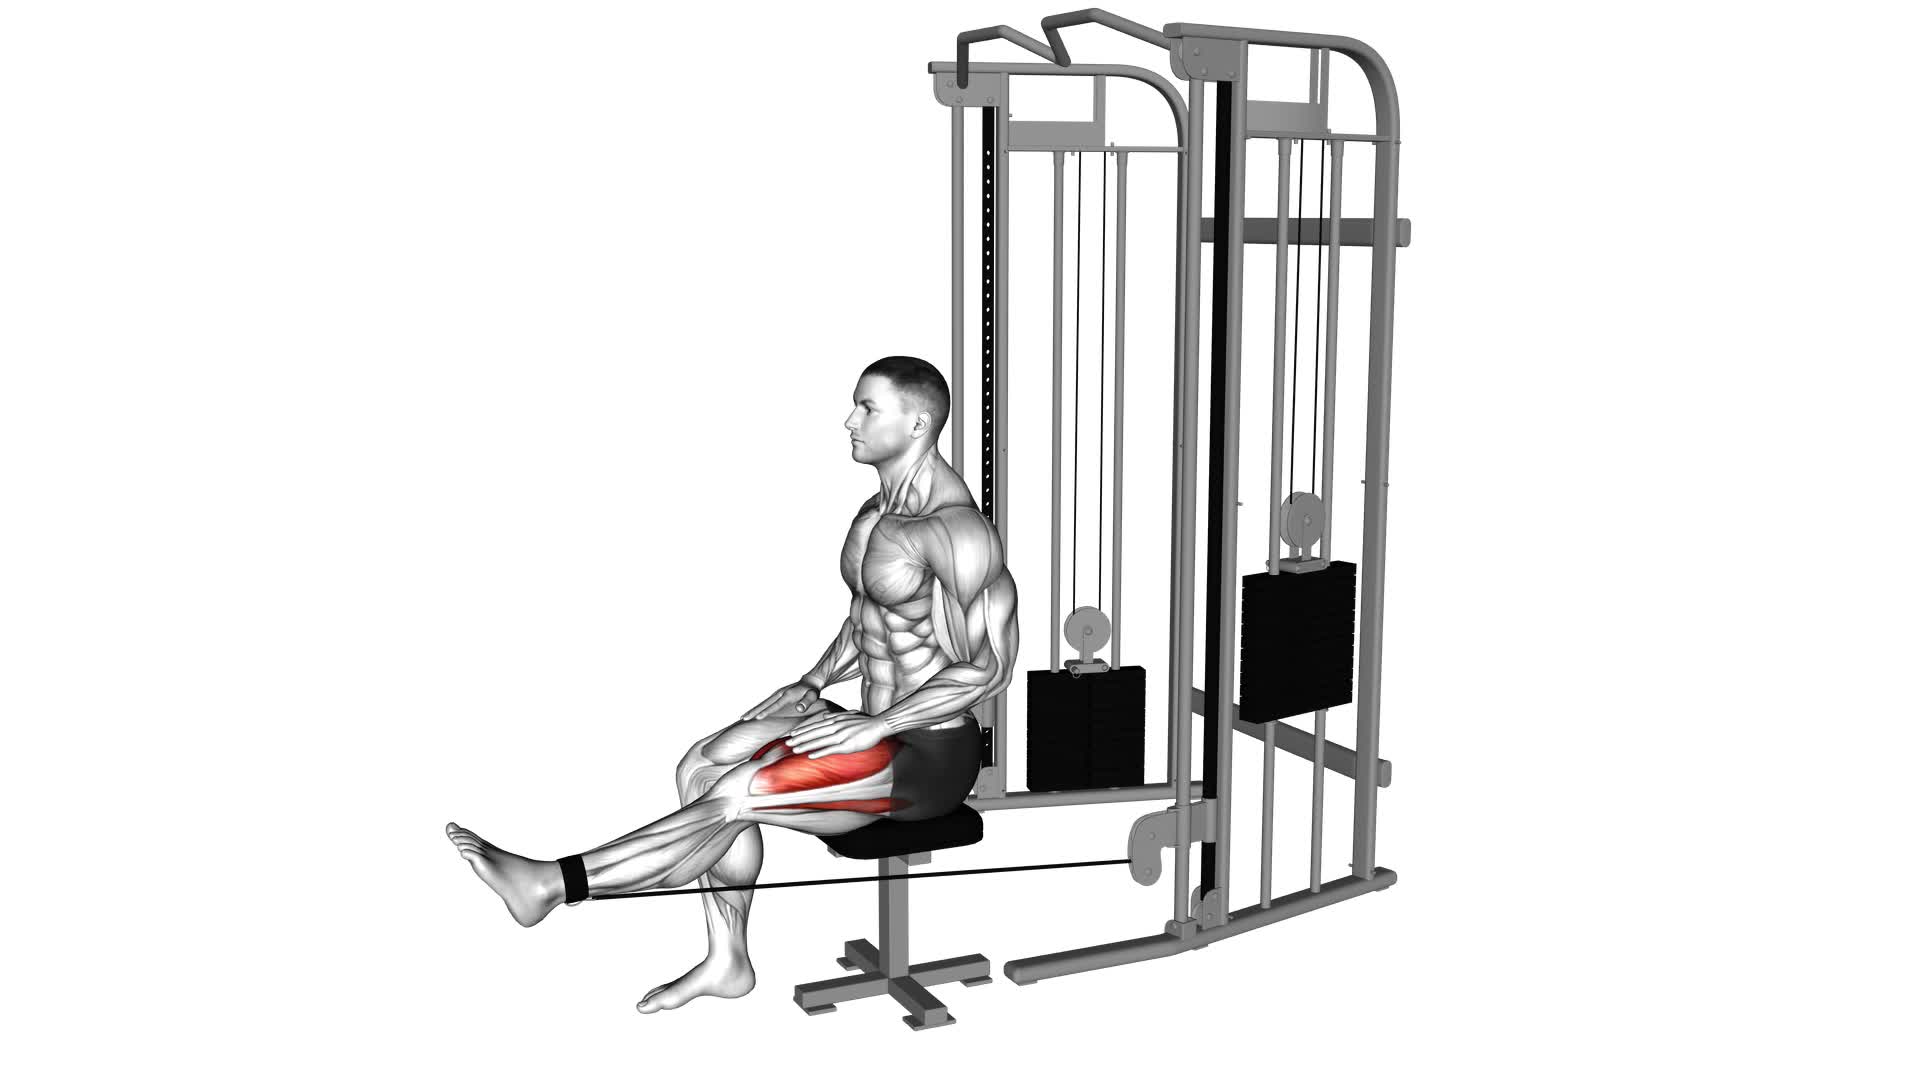 Cable Seated Leg Extension - Video Exercise Guide & Tips